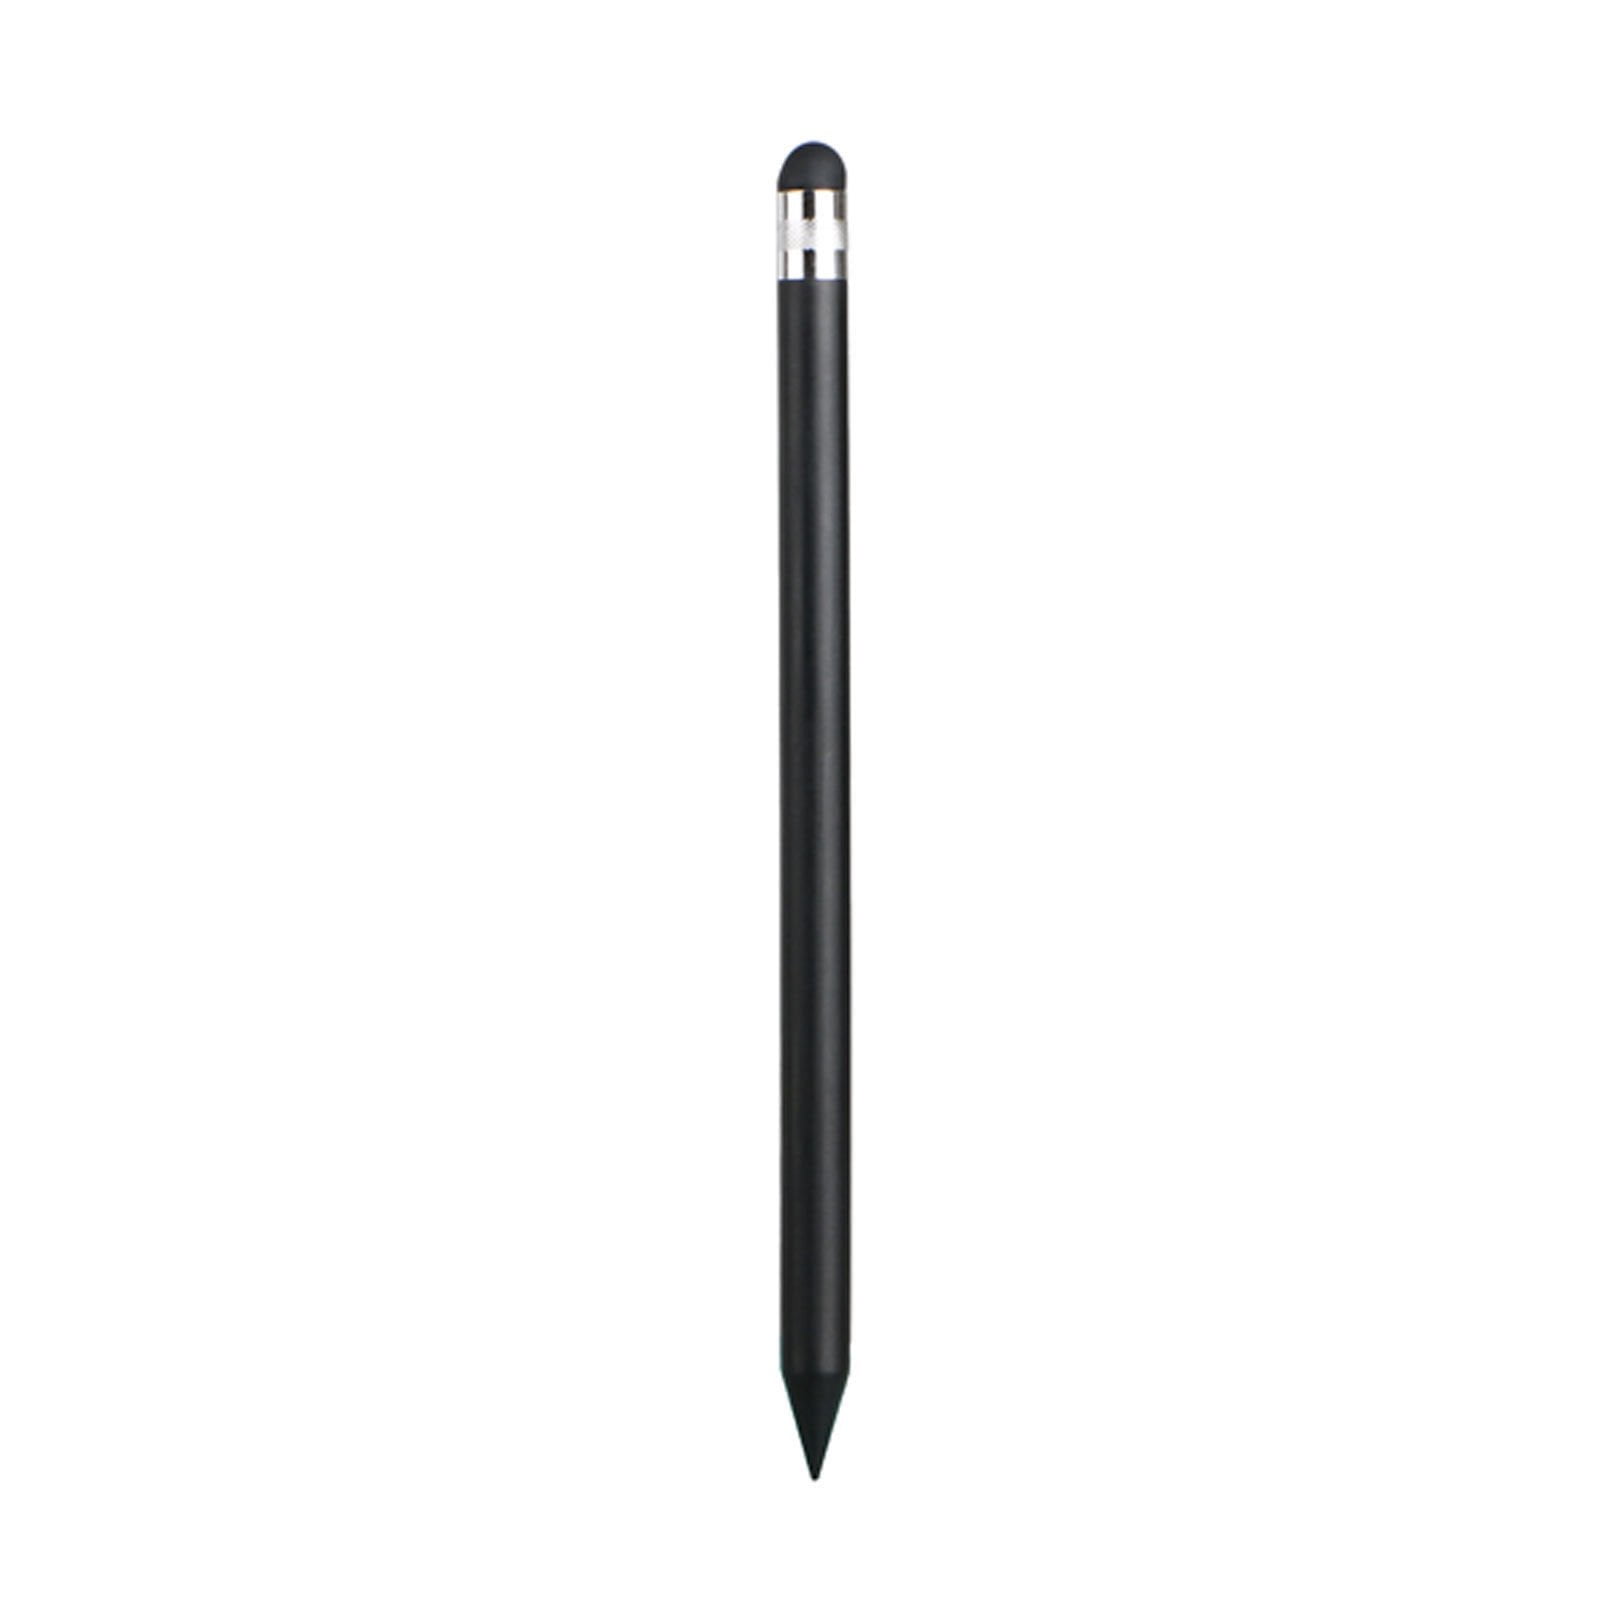 10PCS Touch Screen Plastic Pen Capacitive Stylus Pen For iPhone Samsung Android 